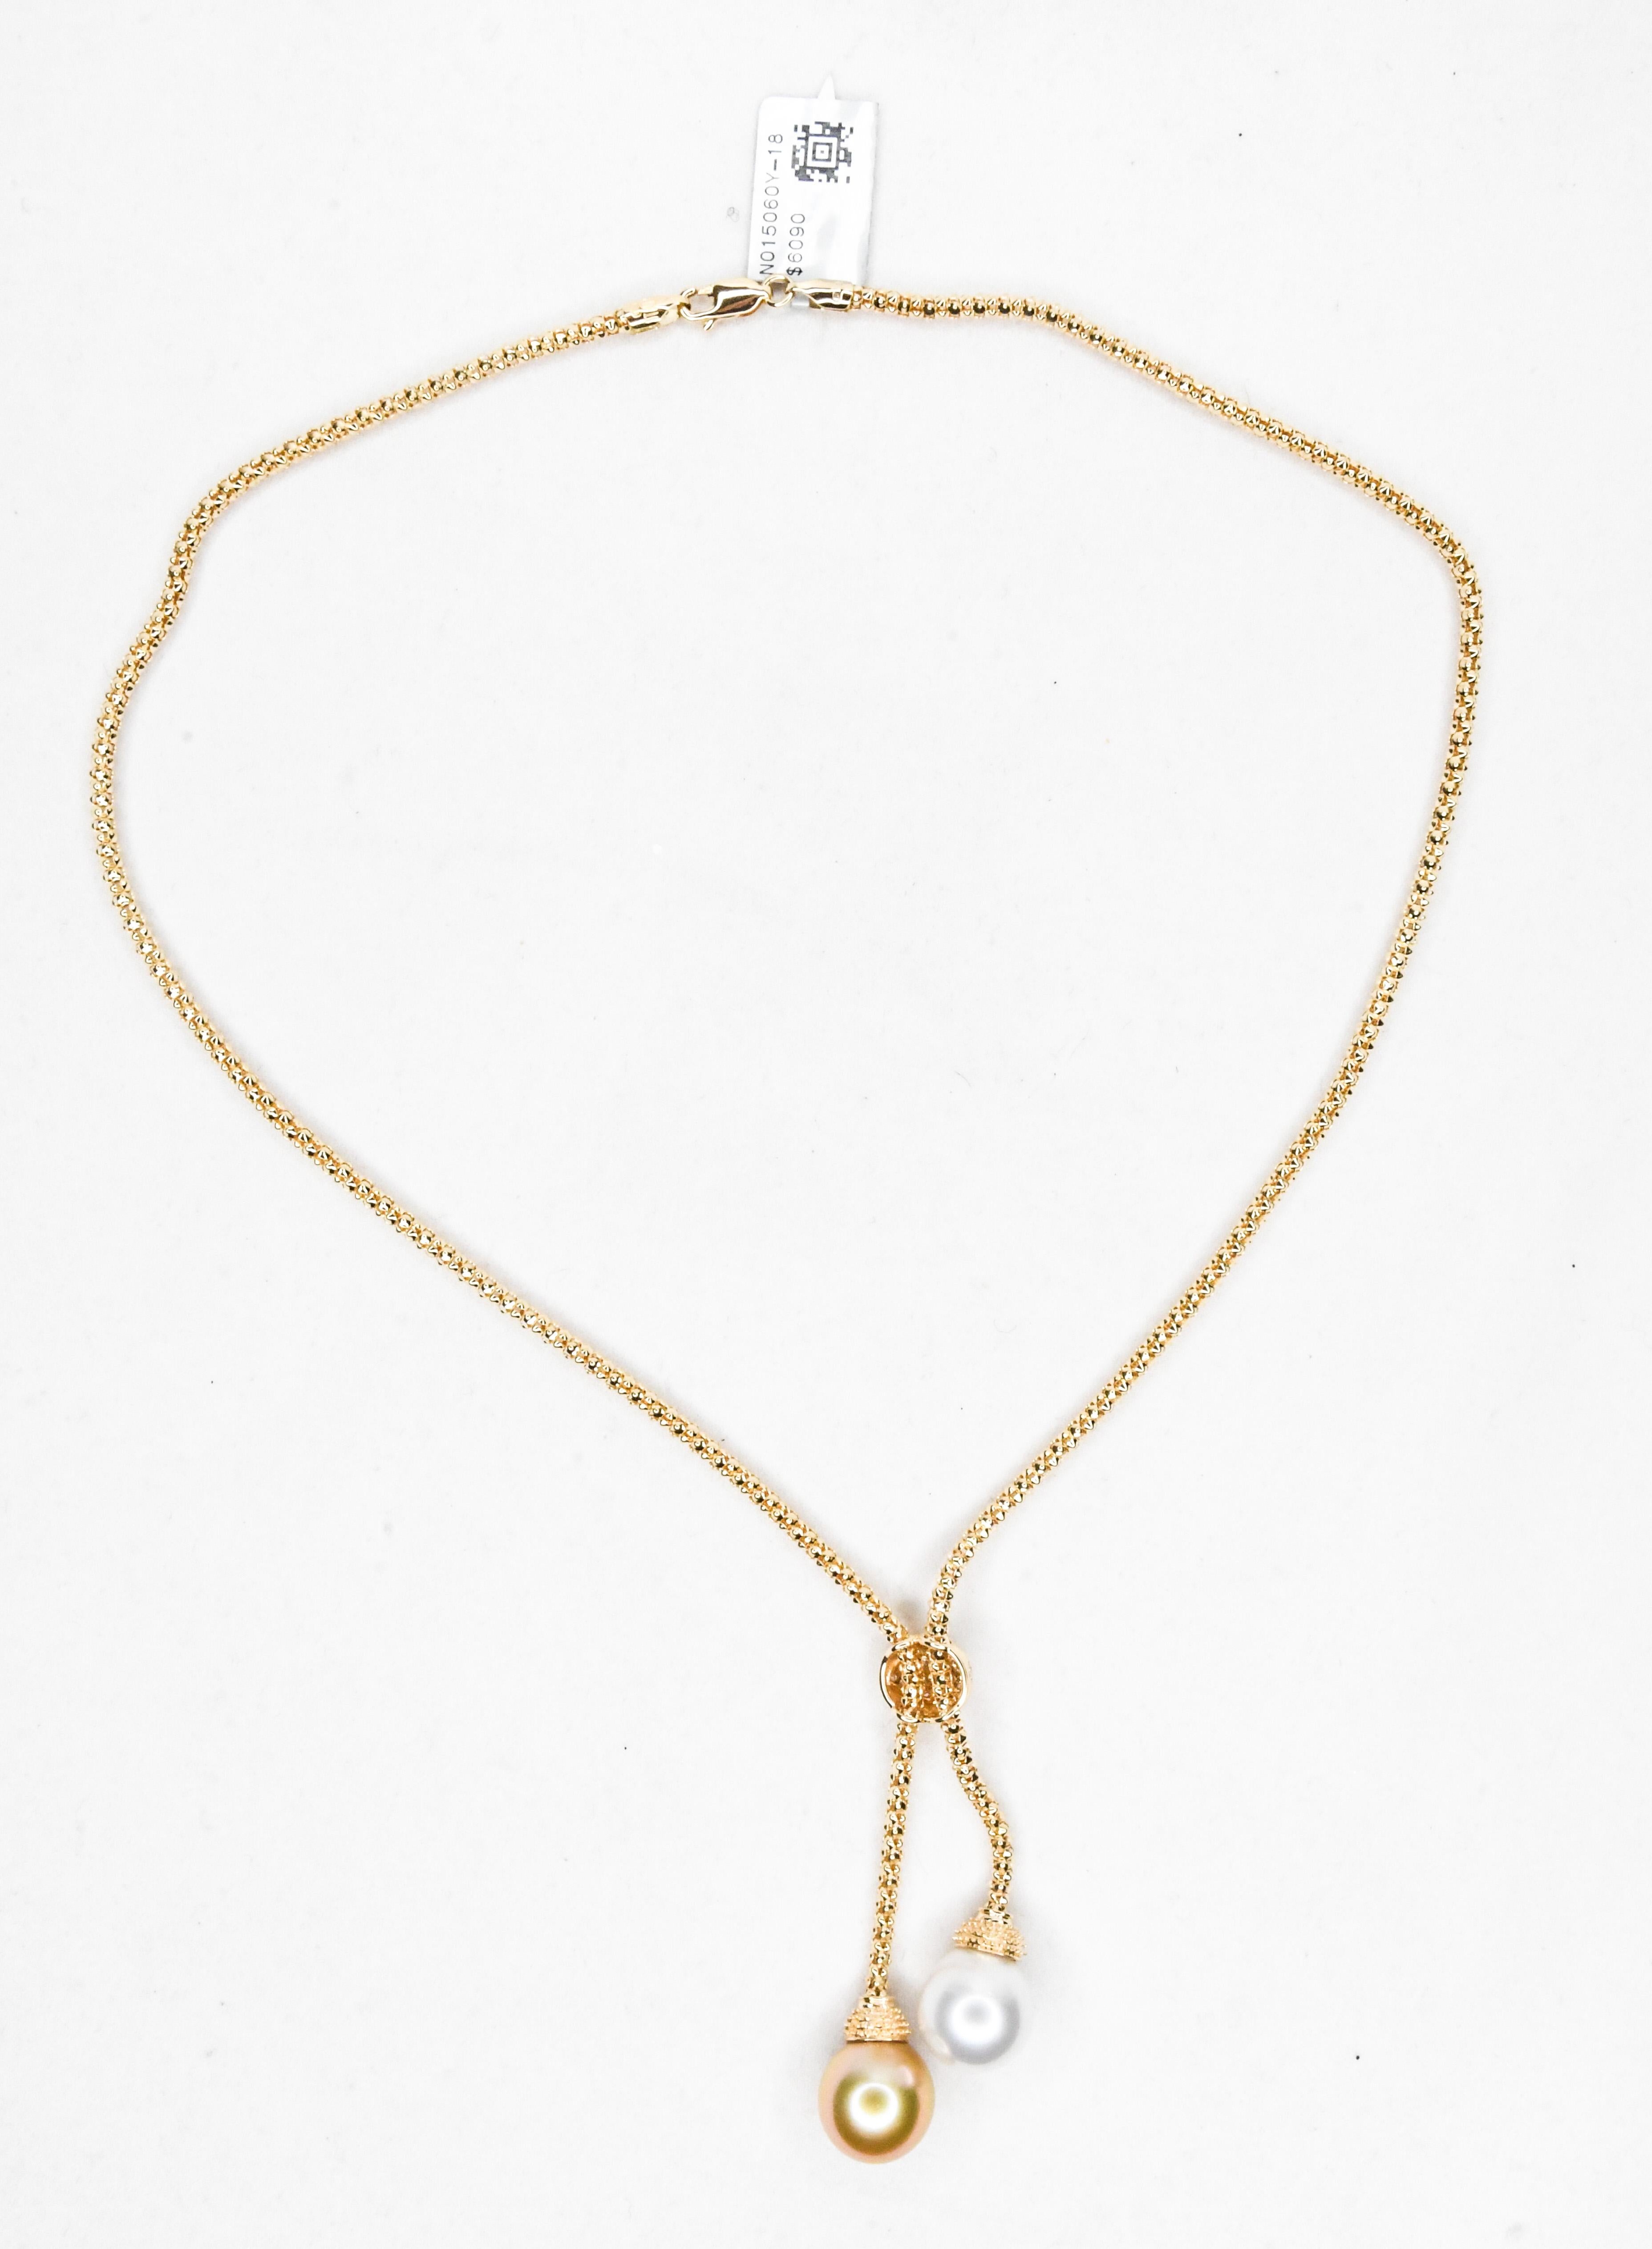 Contemporary 18 Karat Gold South Sea Pearl, White South Sea Pearl and Diamonds Necklace